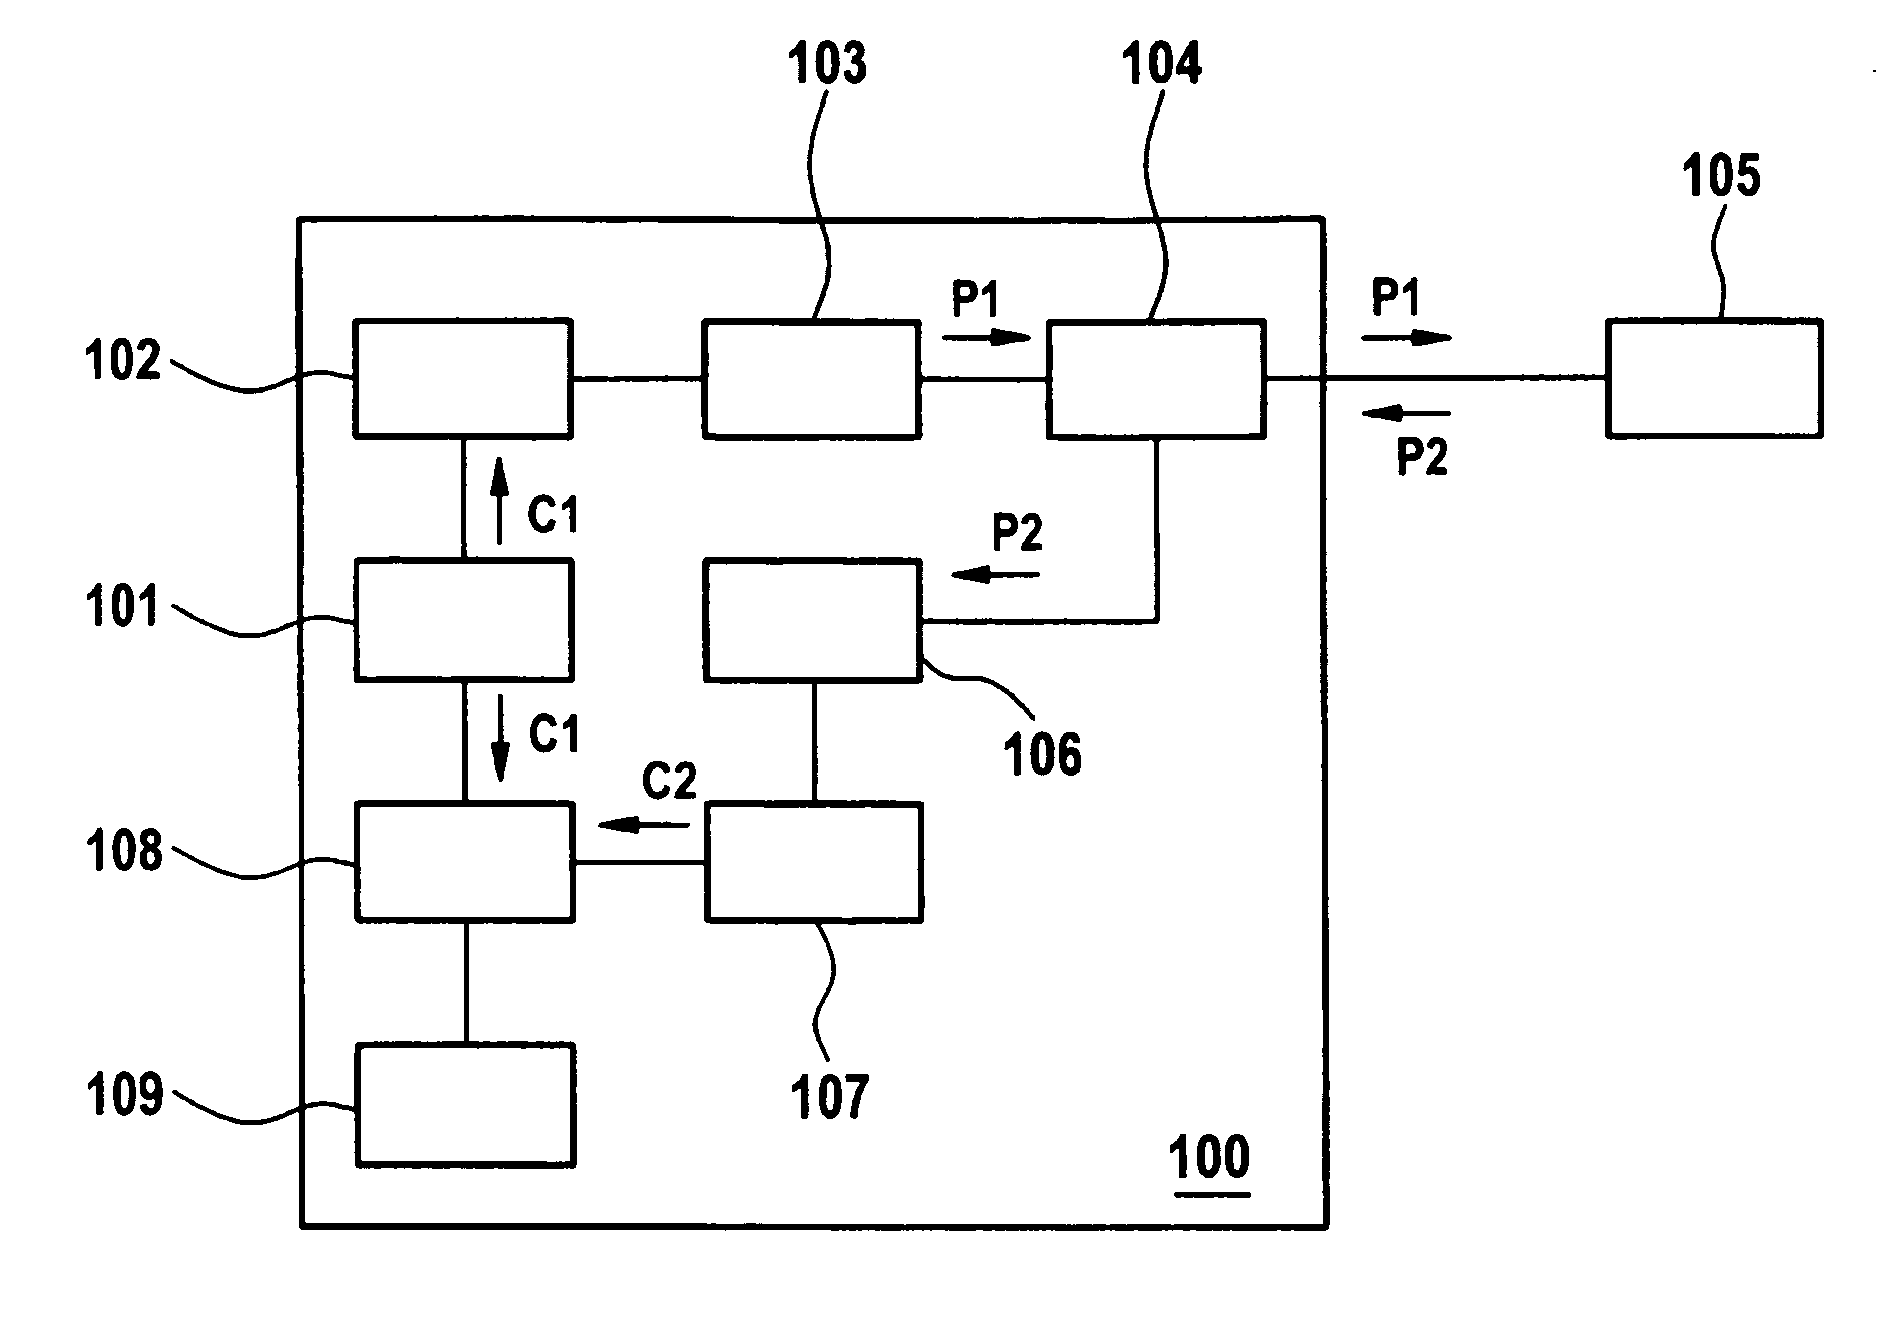 Time-of-flight measurement using pulse sequences